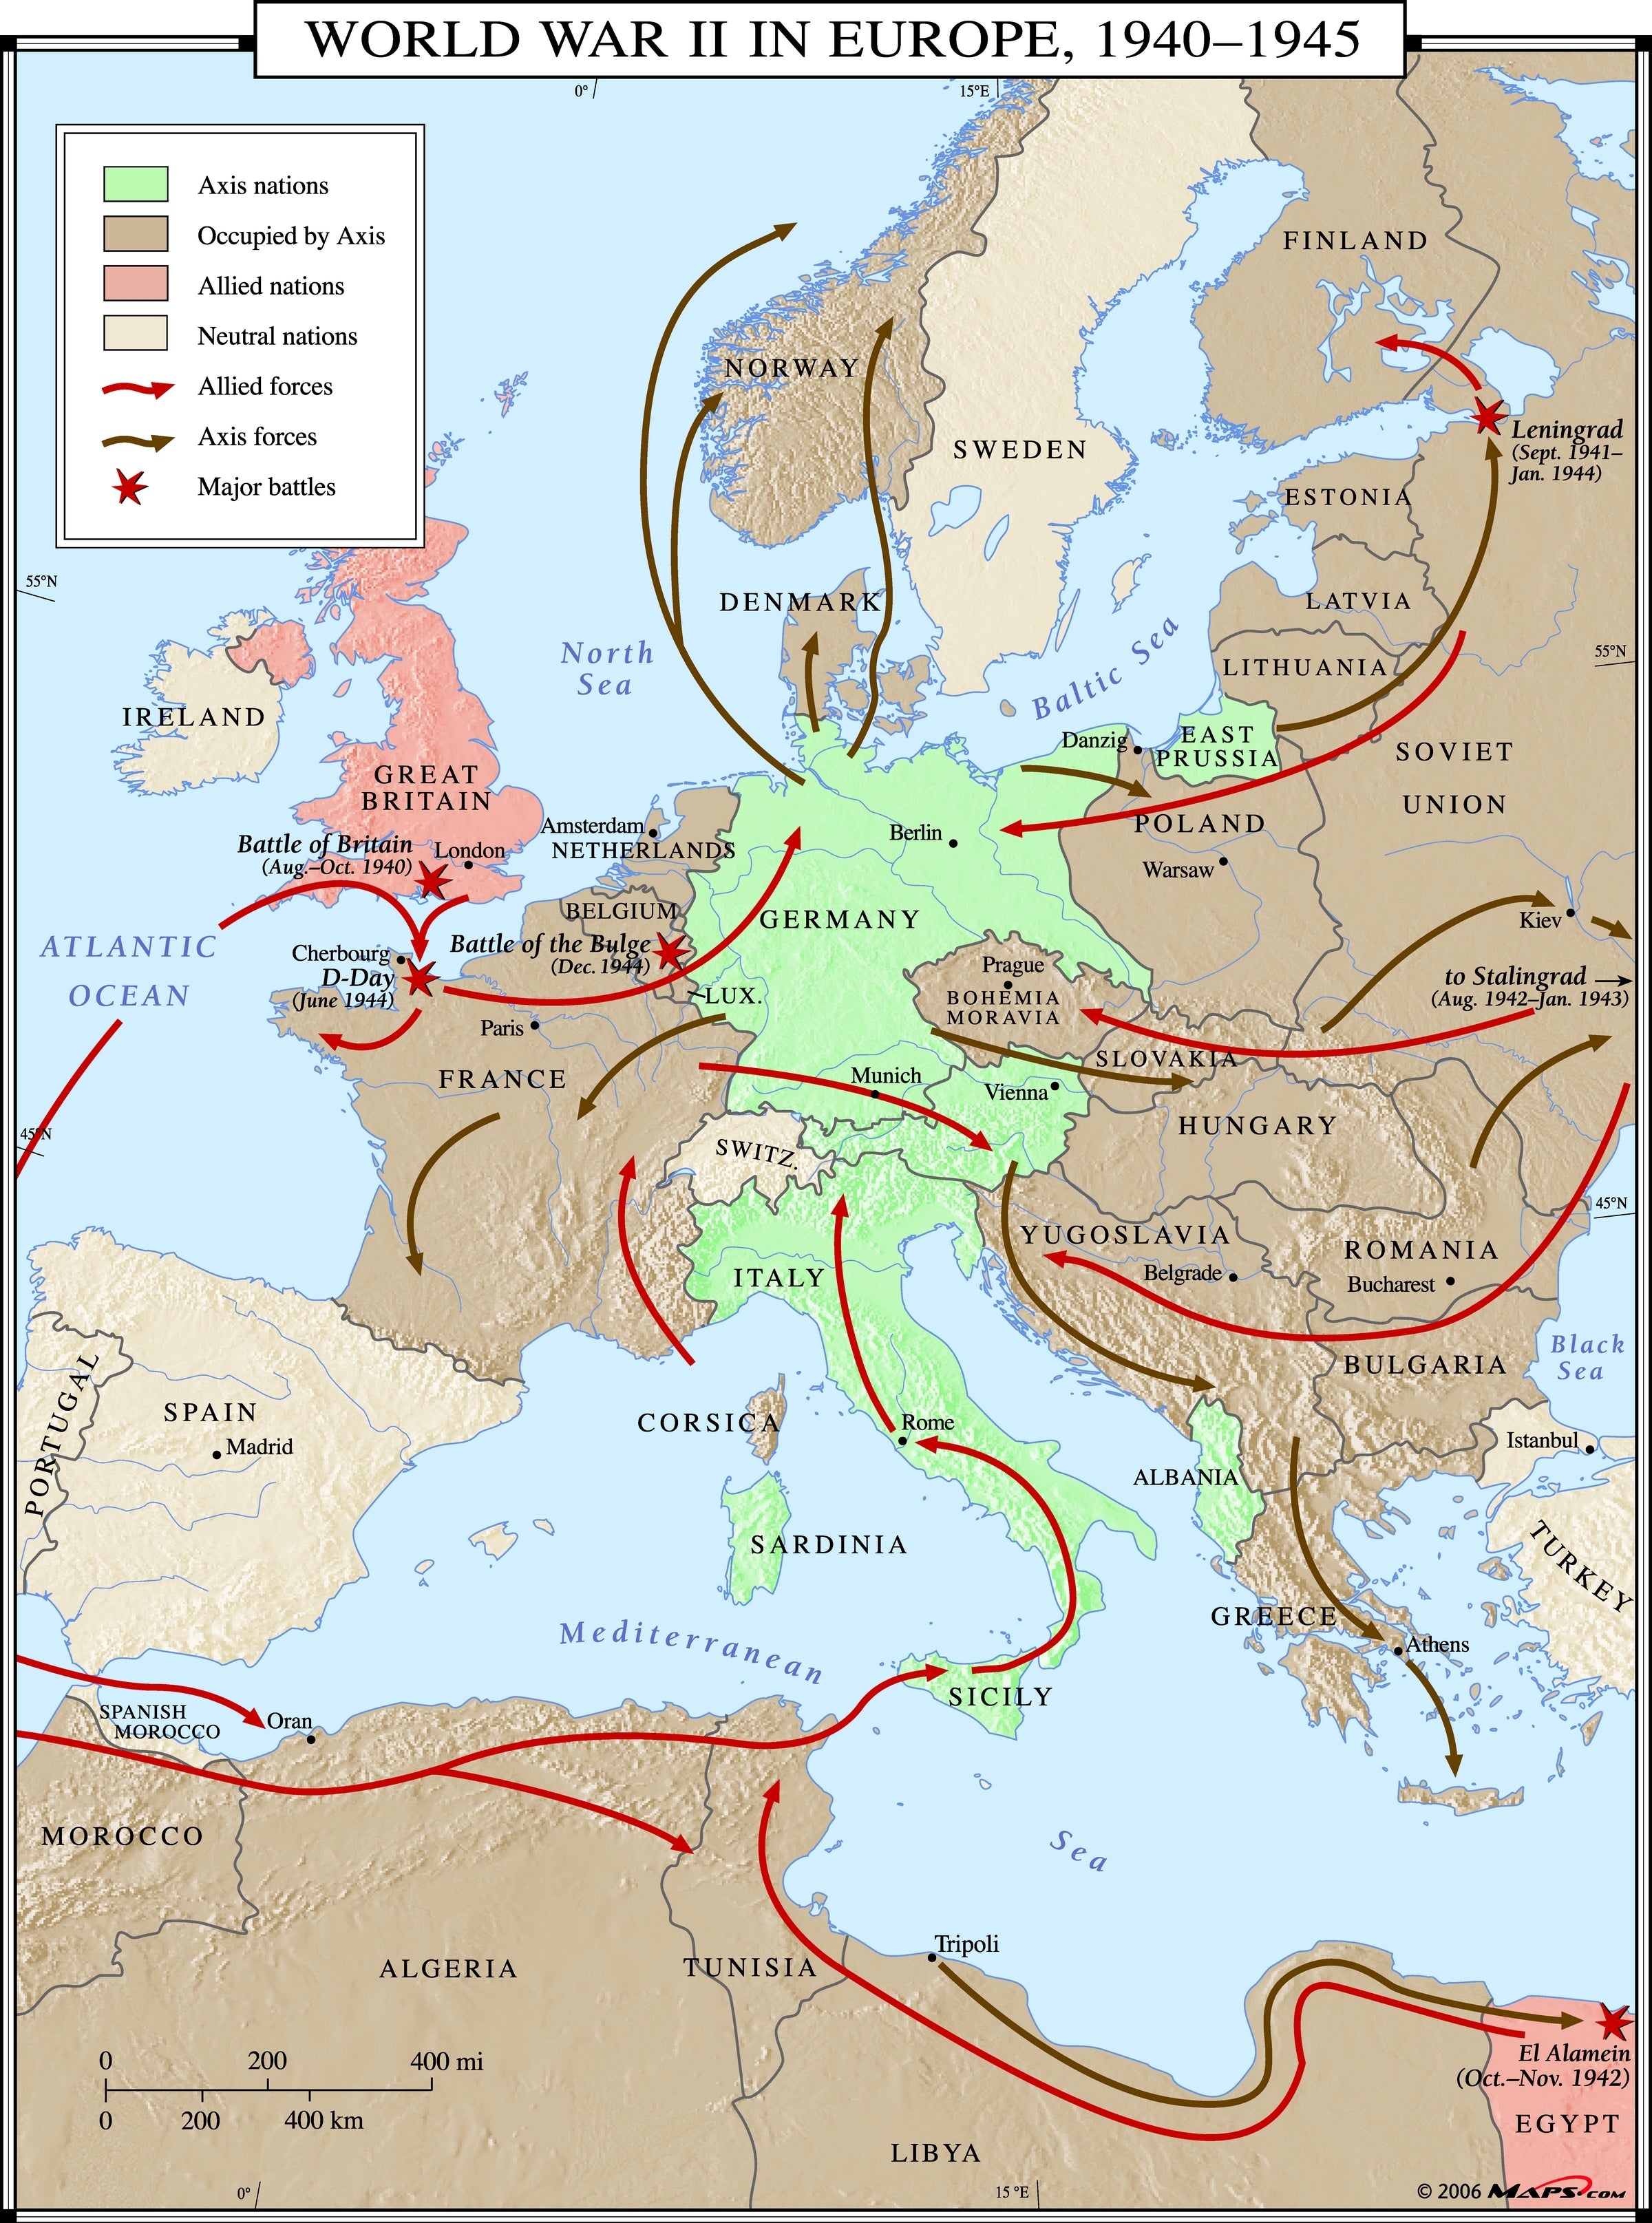 Map Of World War Ii This overview map shows the second World War, the European Theater 